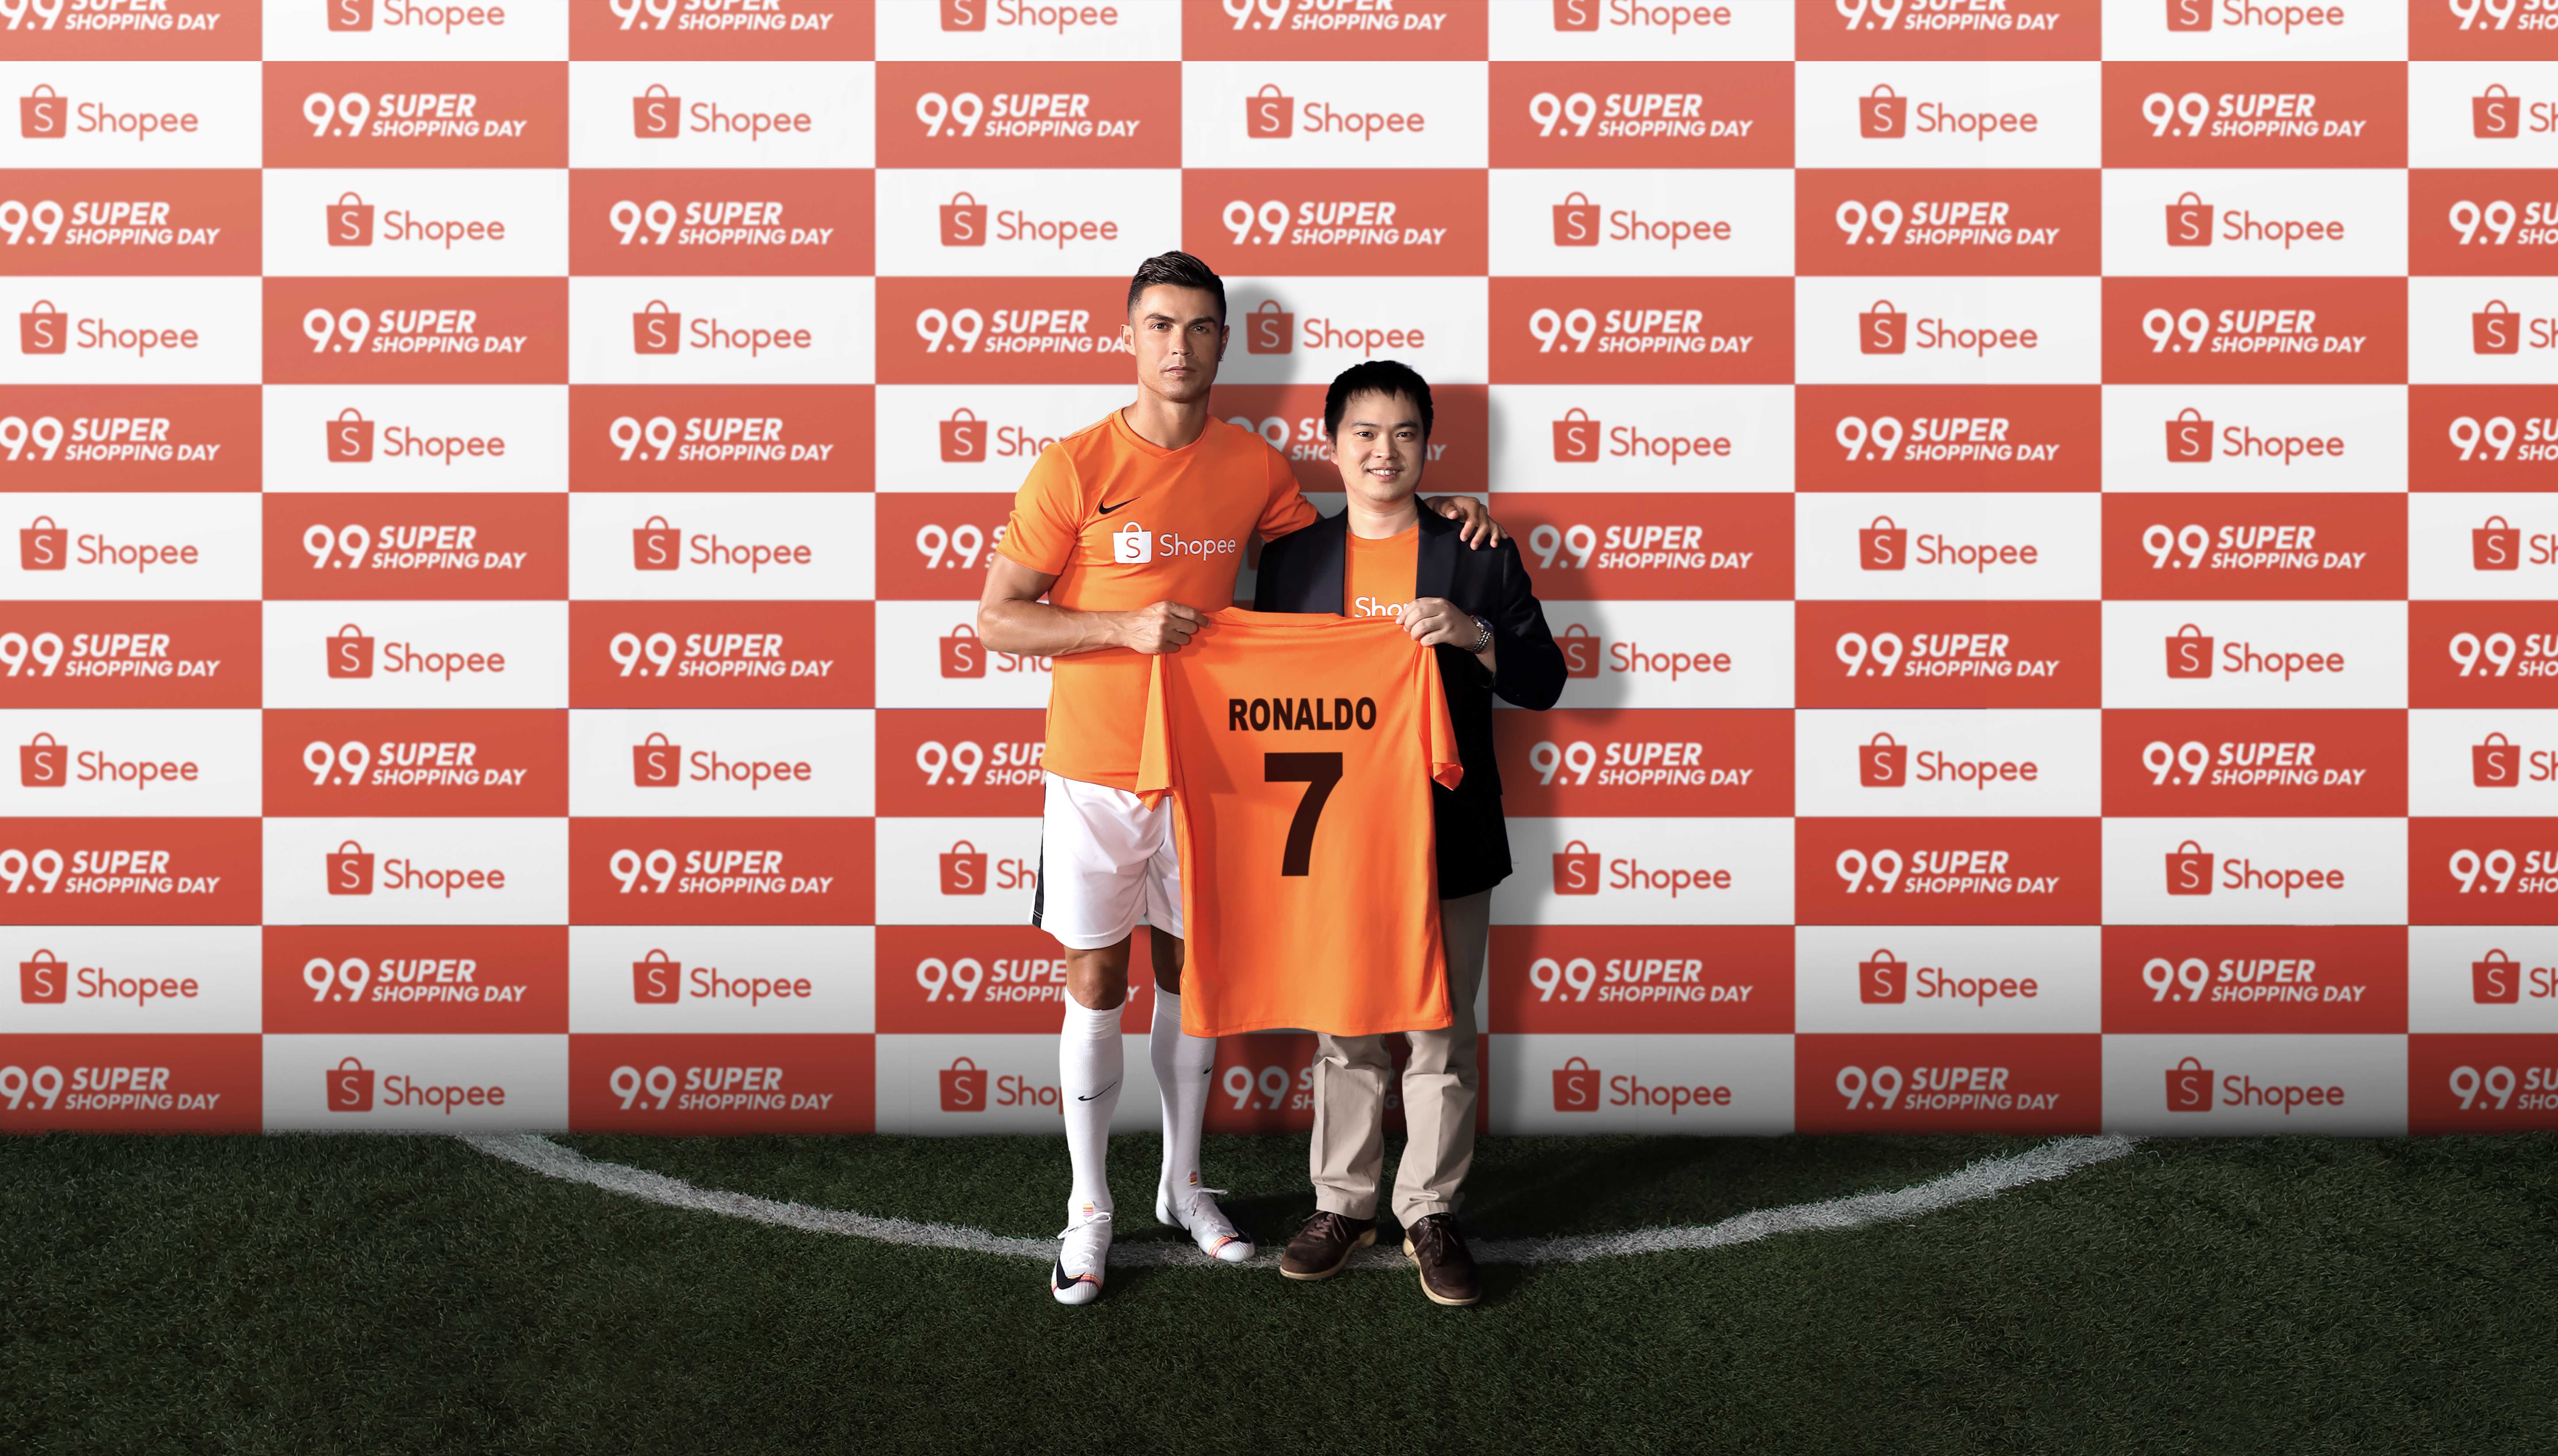 Superstar Cristiano Ronaldo is Shopee’s latest Brand Ambassador for the upcoming 9.9 Super Shopping Day - Alvinology